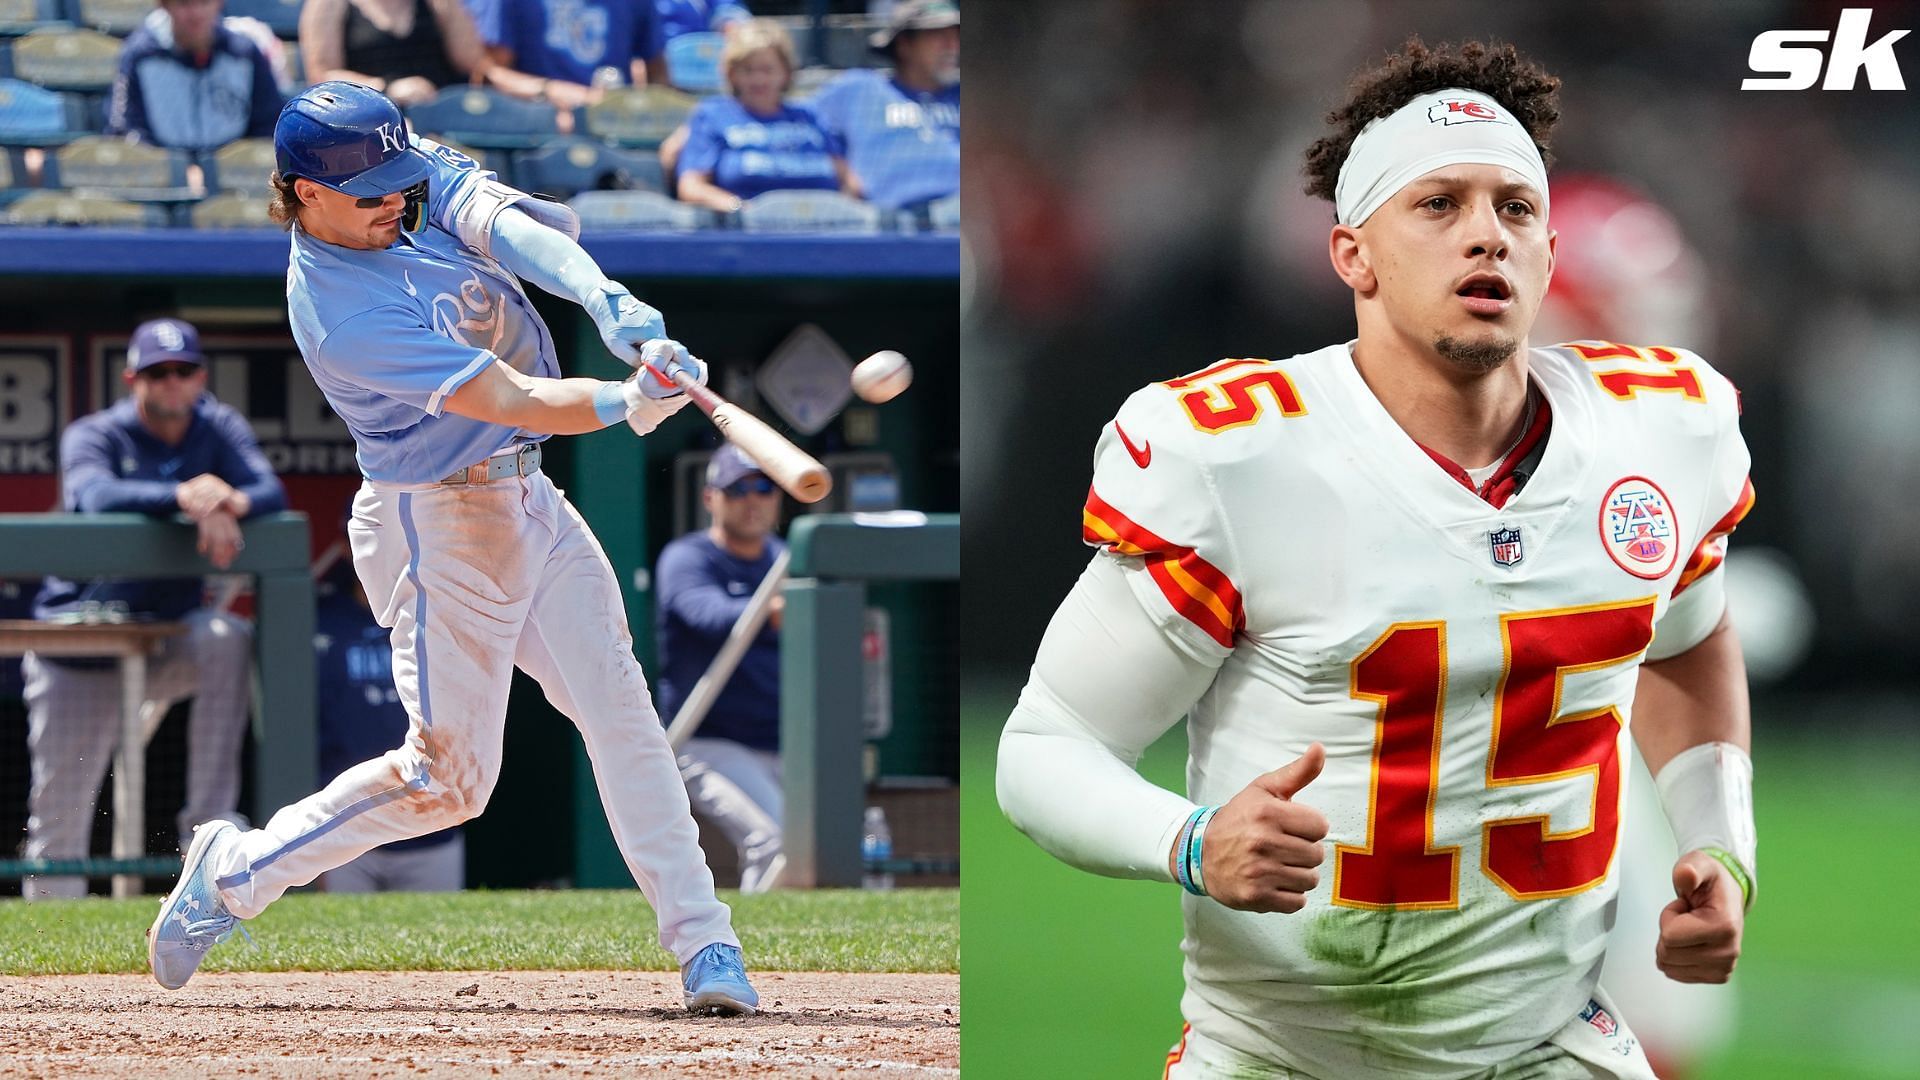 Kansas City Chiefs QB Patrick Mahomes challenged to a duel after cheeky dig  at Bobby Witt Jr's bat speed